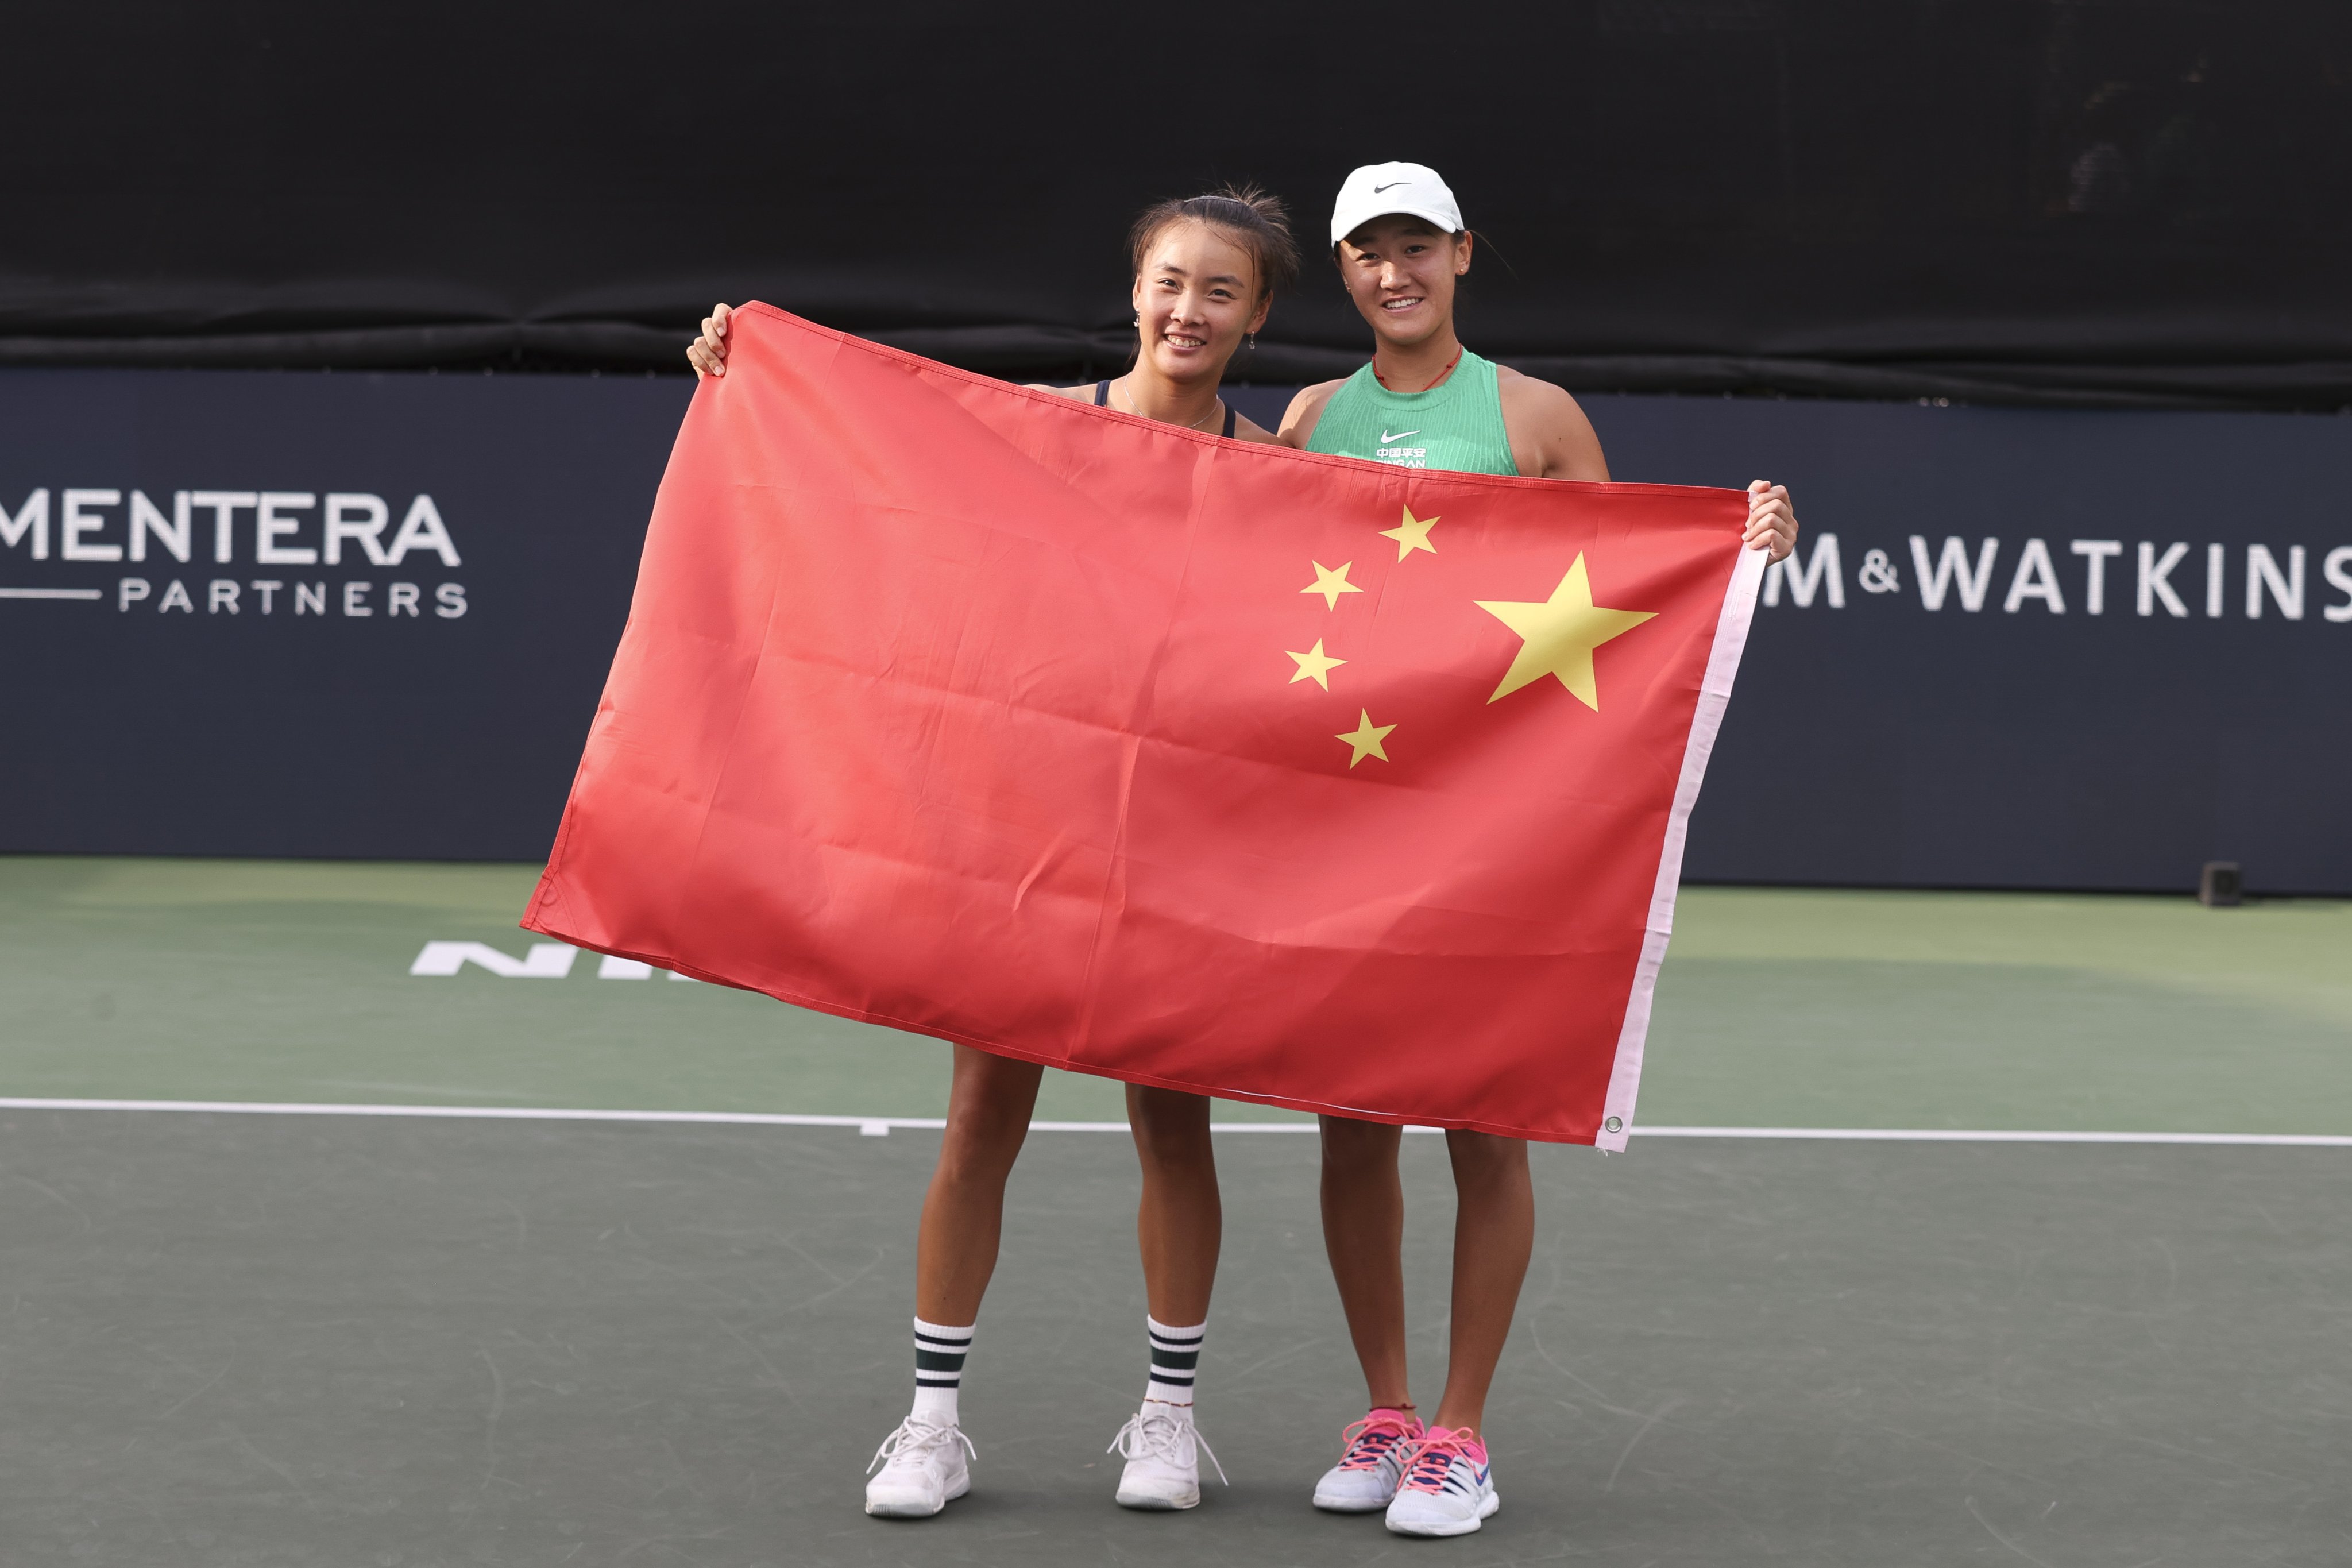 Yuan Yue (left) and Wang Xiyu pose with the Chinese flag after their final in Austin. Photo: EPA-EFE